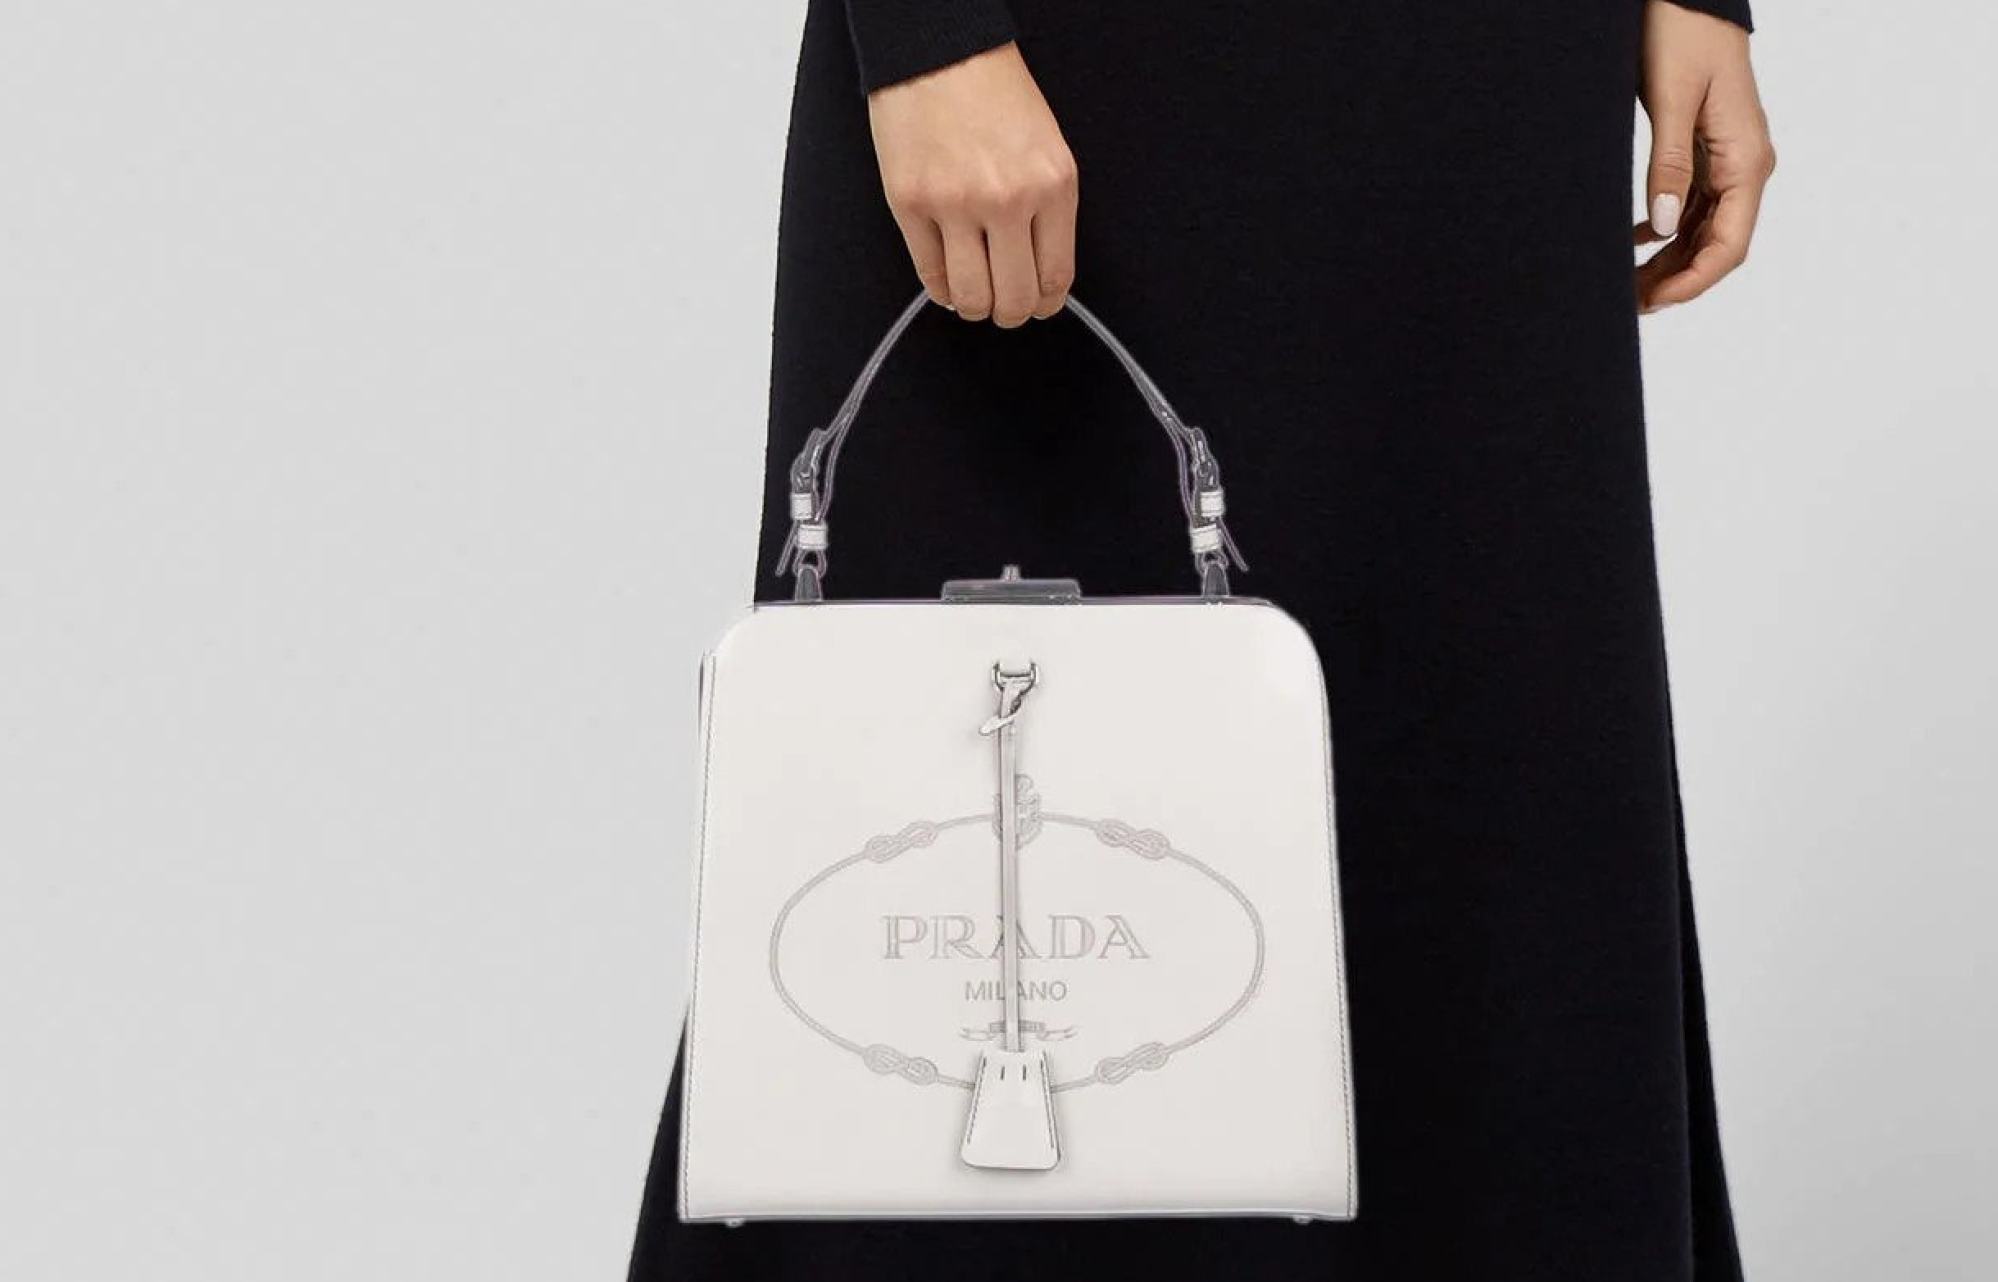 These Breakfast at Tiffany's Inspired Bags Are on My Wish List